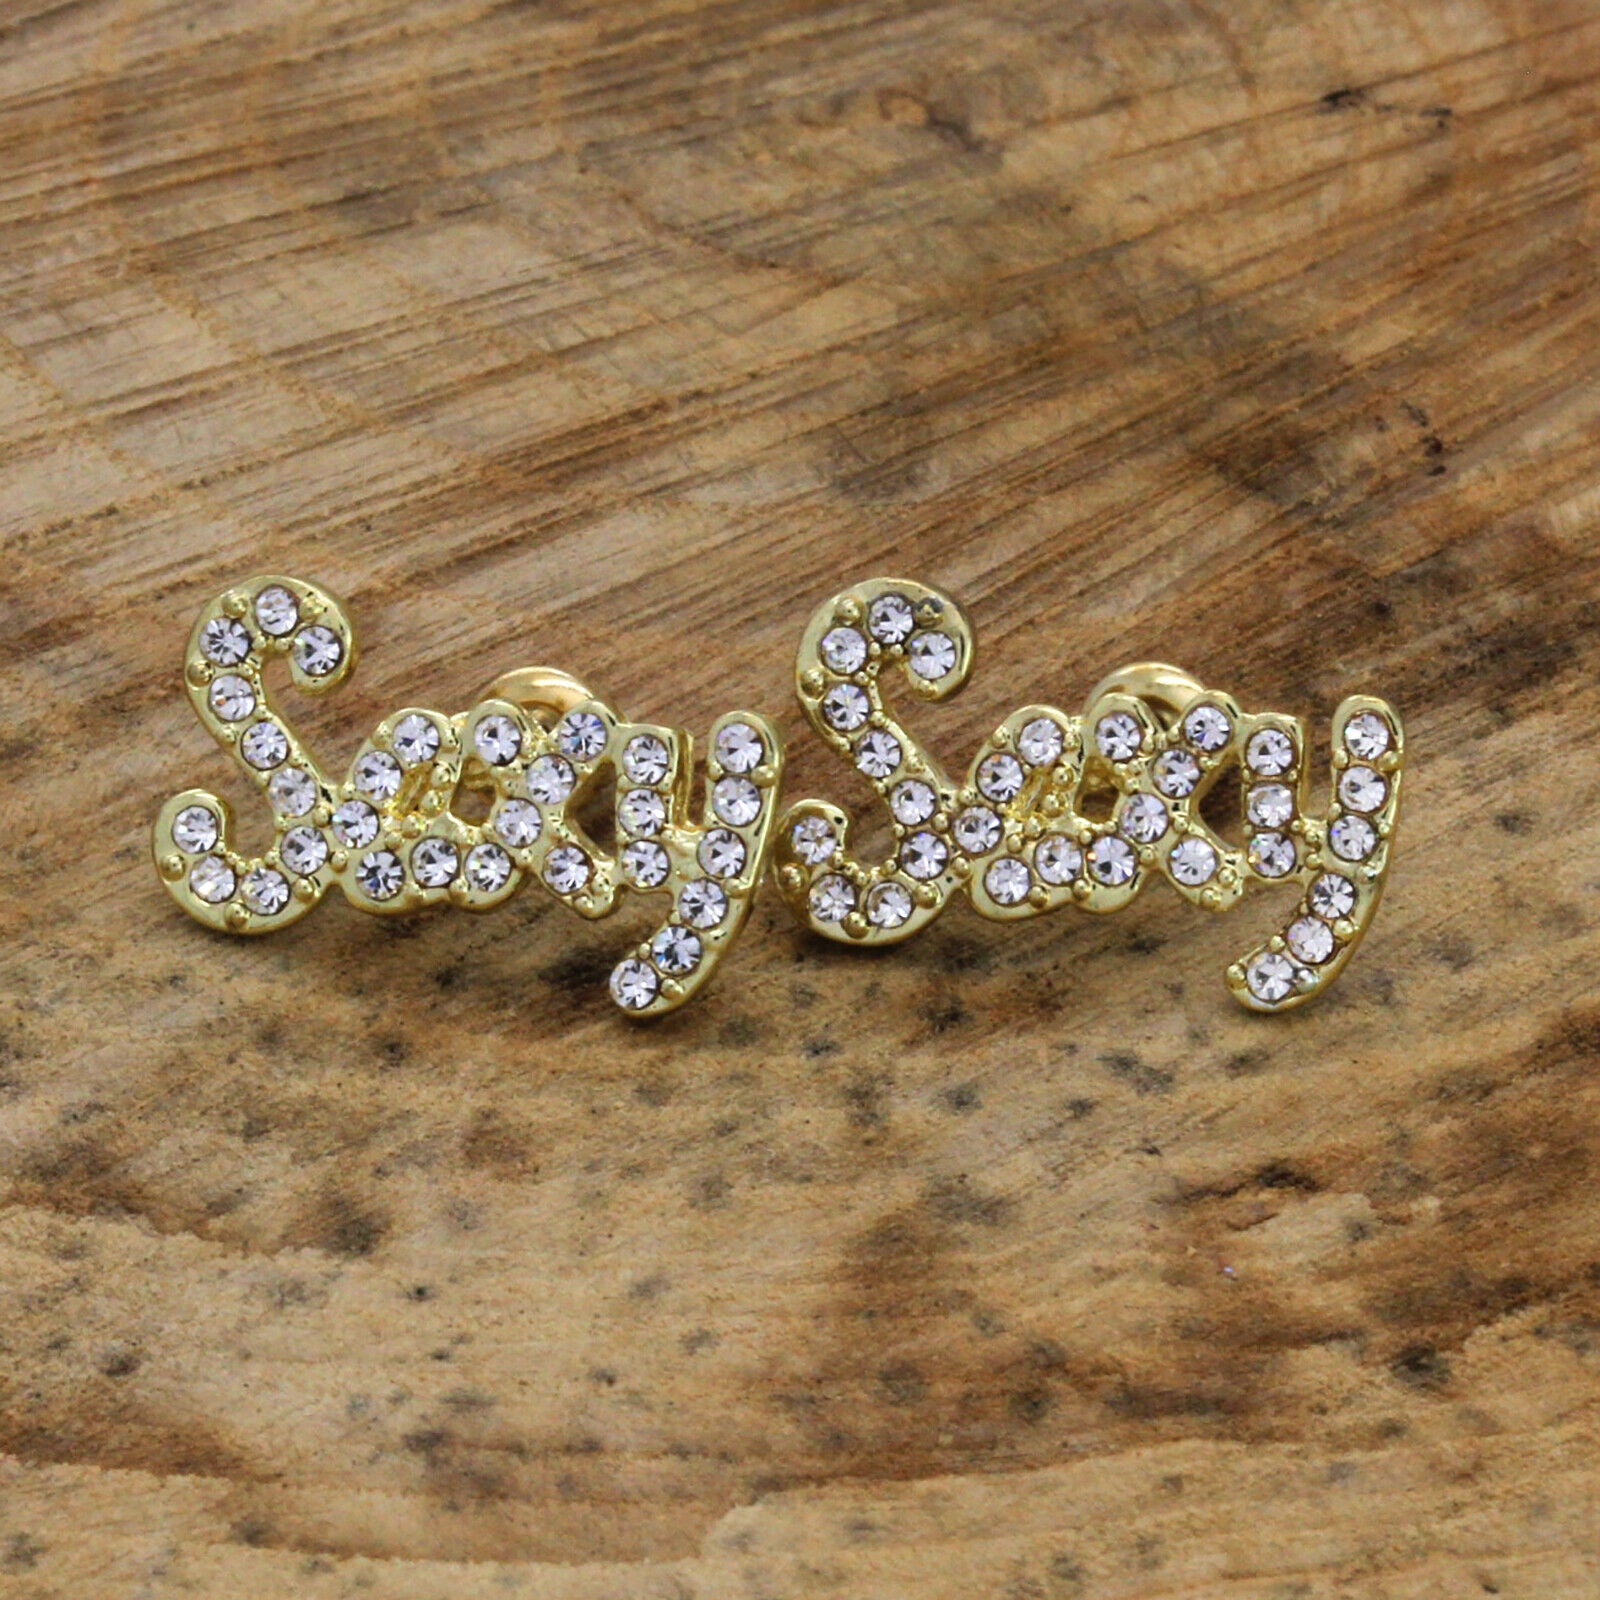 Cz SEXY GOLD FILLED EARRINGS